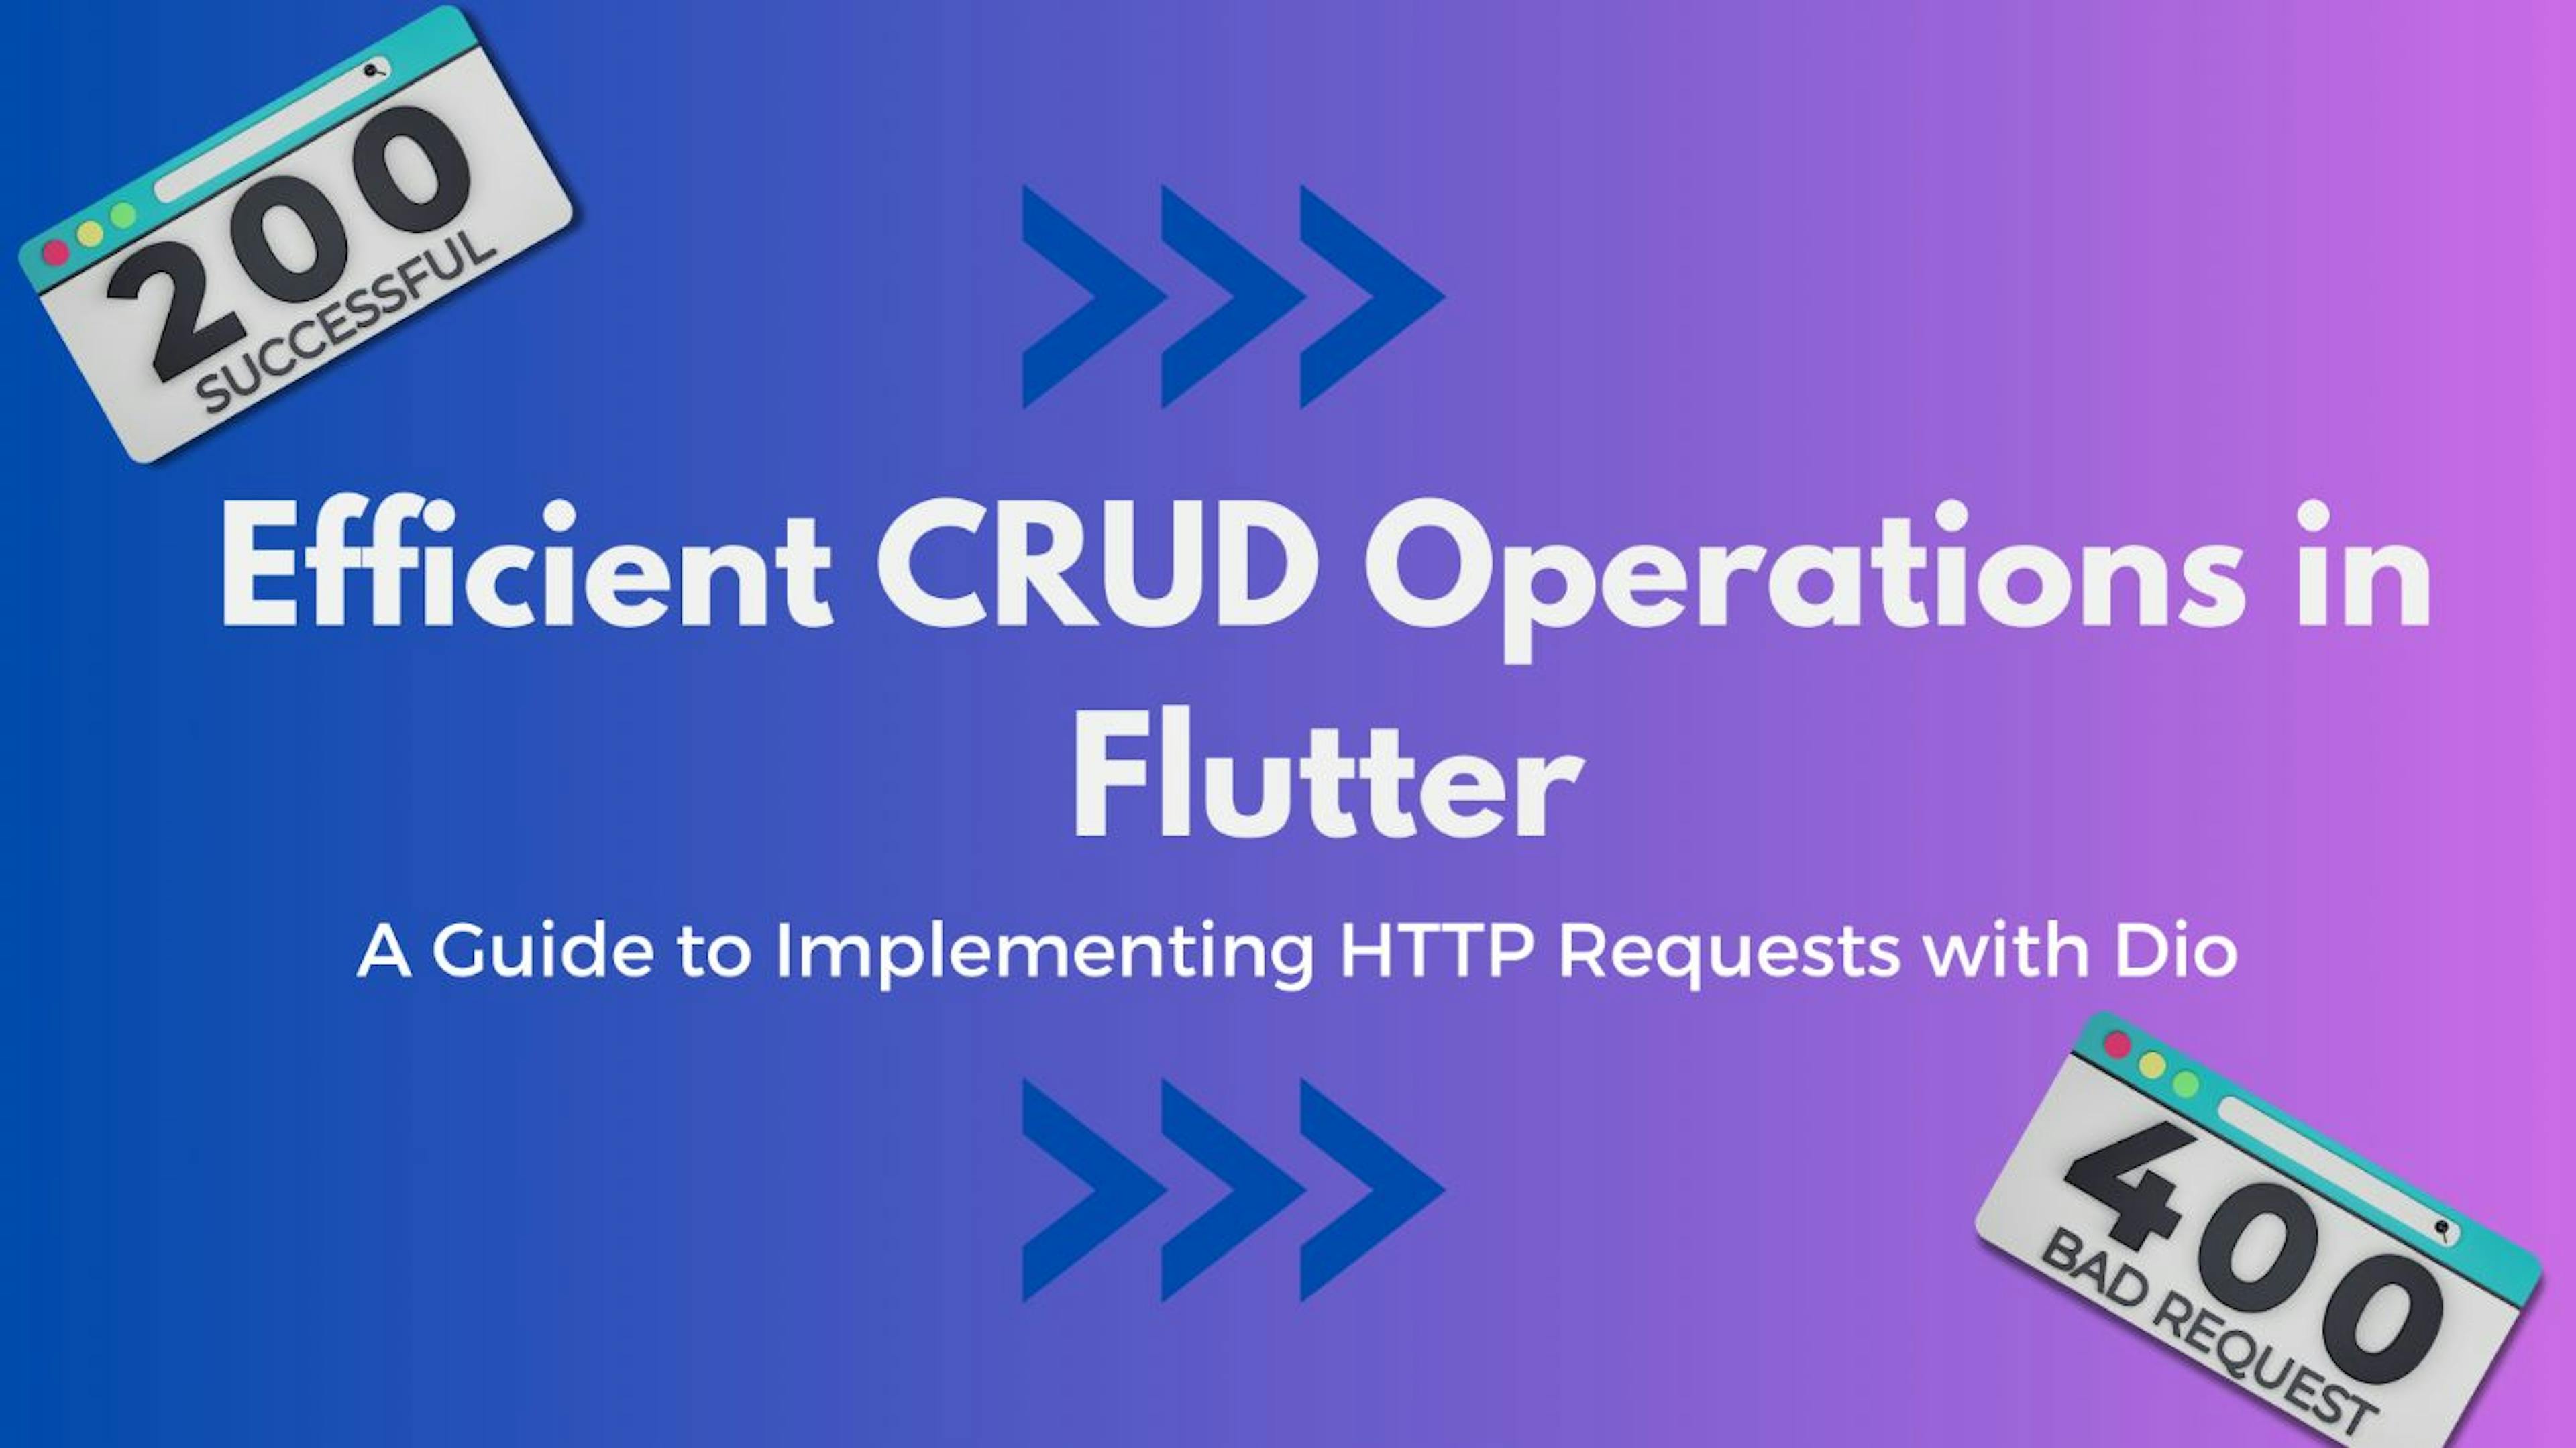 featured image - Optimizing CRUD Operations in Flutter: How to Implement HTTP Requests with Dio